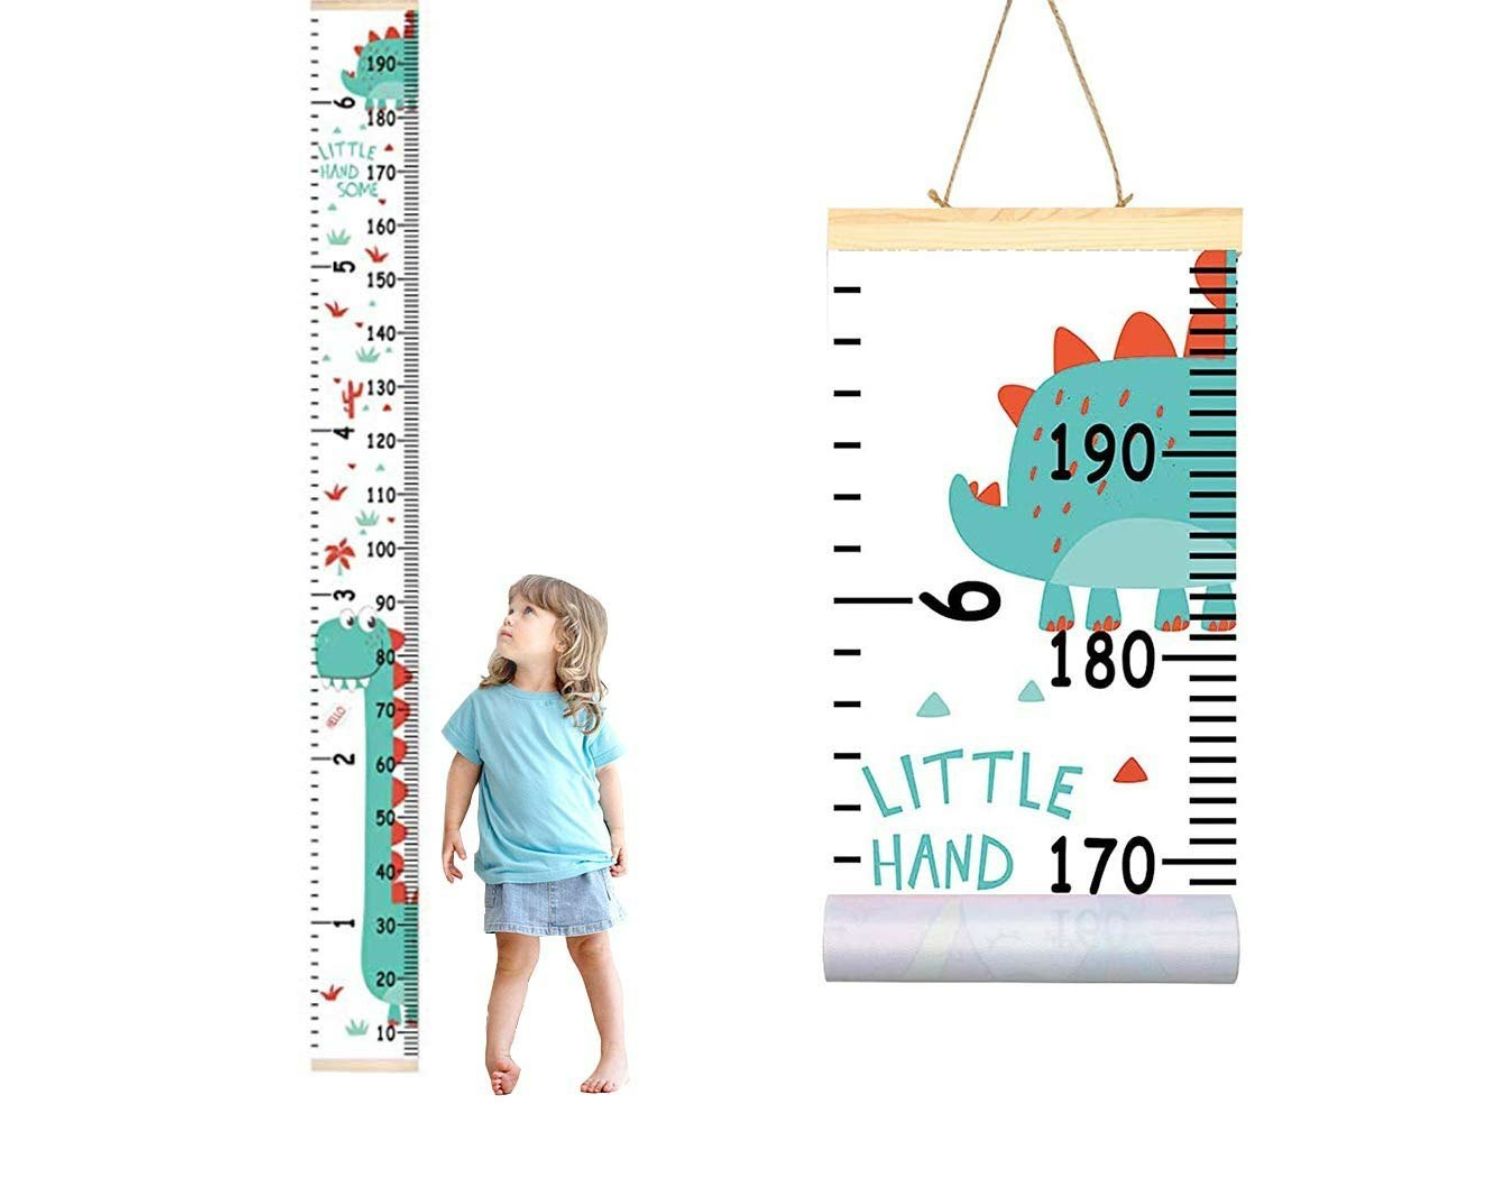 Review: Best Baby Growth Chart for Tracking Your Little One’s Progress